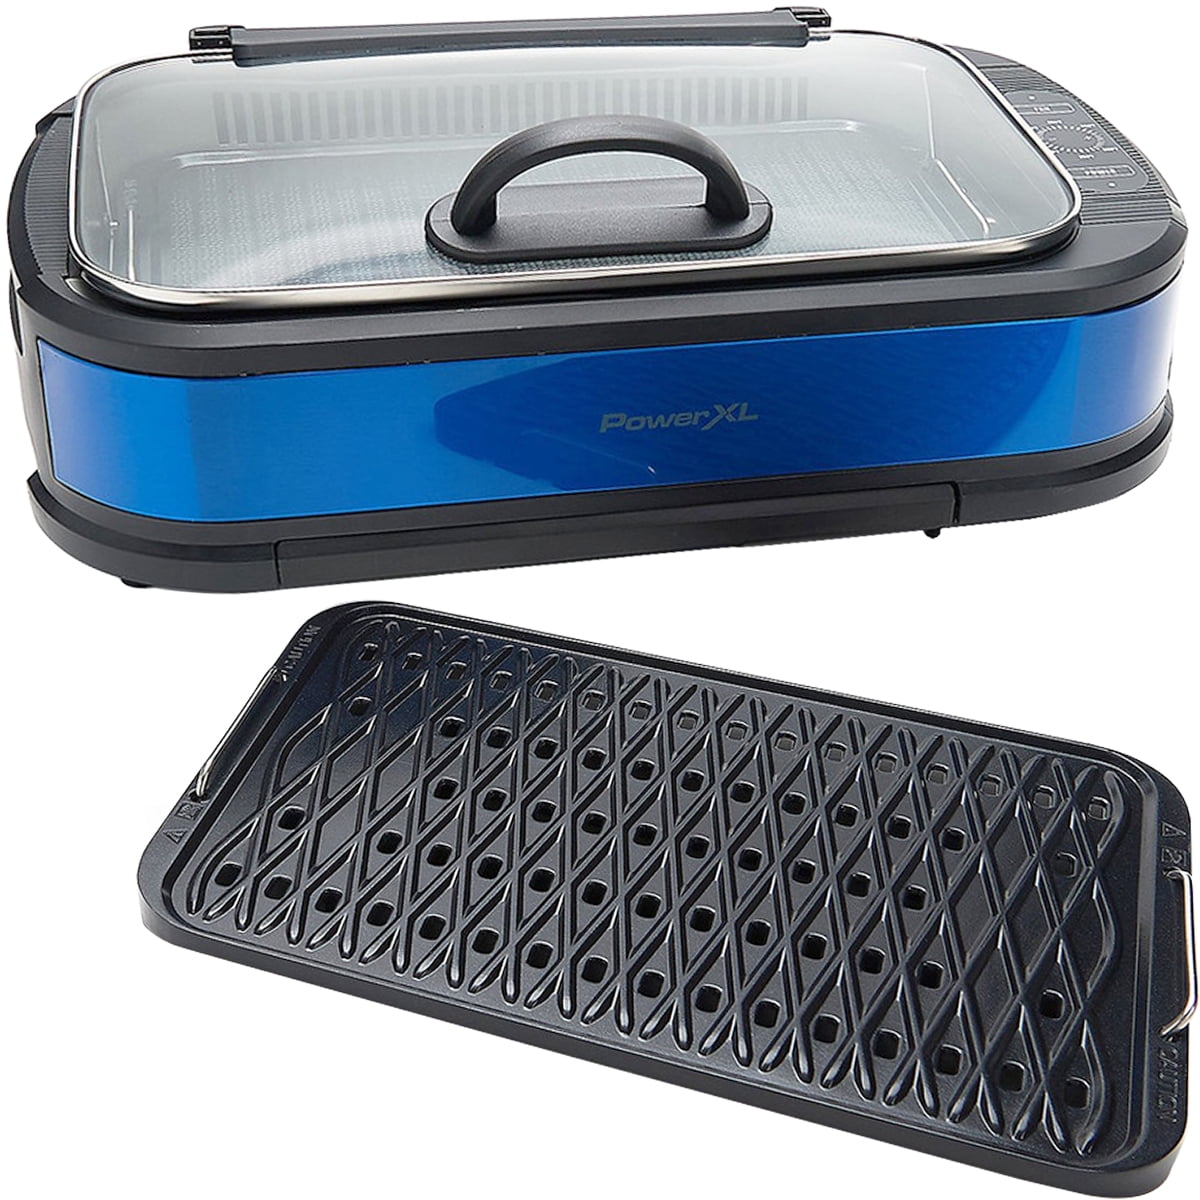 Powerxl 1500w Smokeless Grill Pro With Griddle Plate Manufacturer  Refurbished K54319 Blue : Target